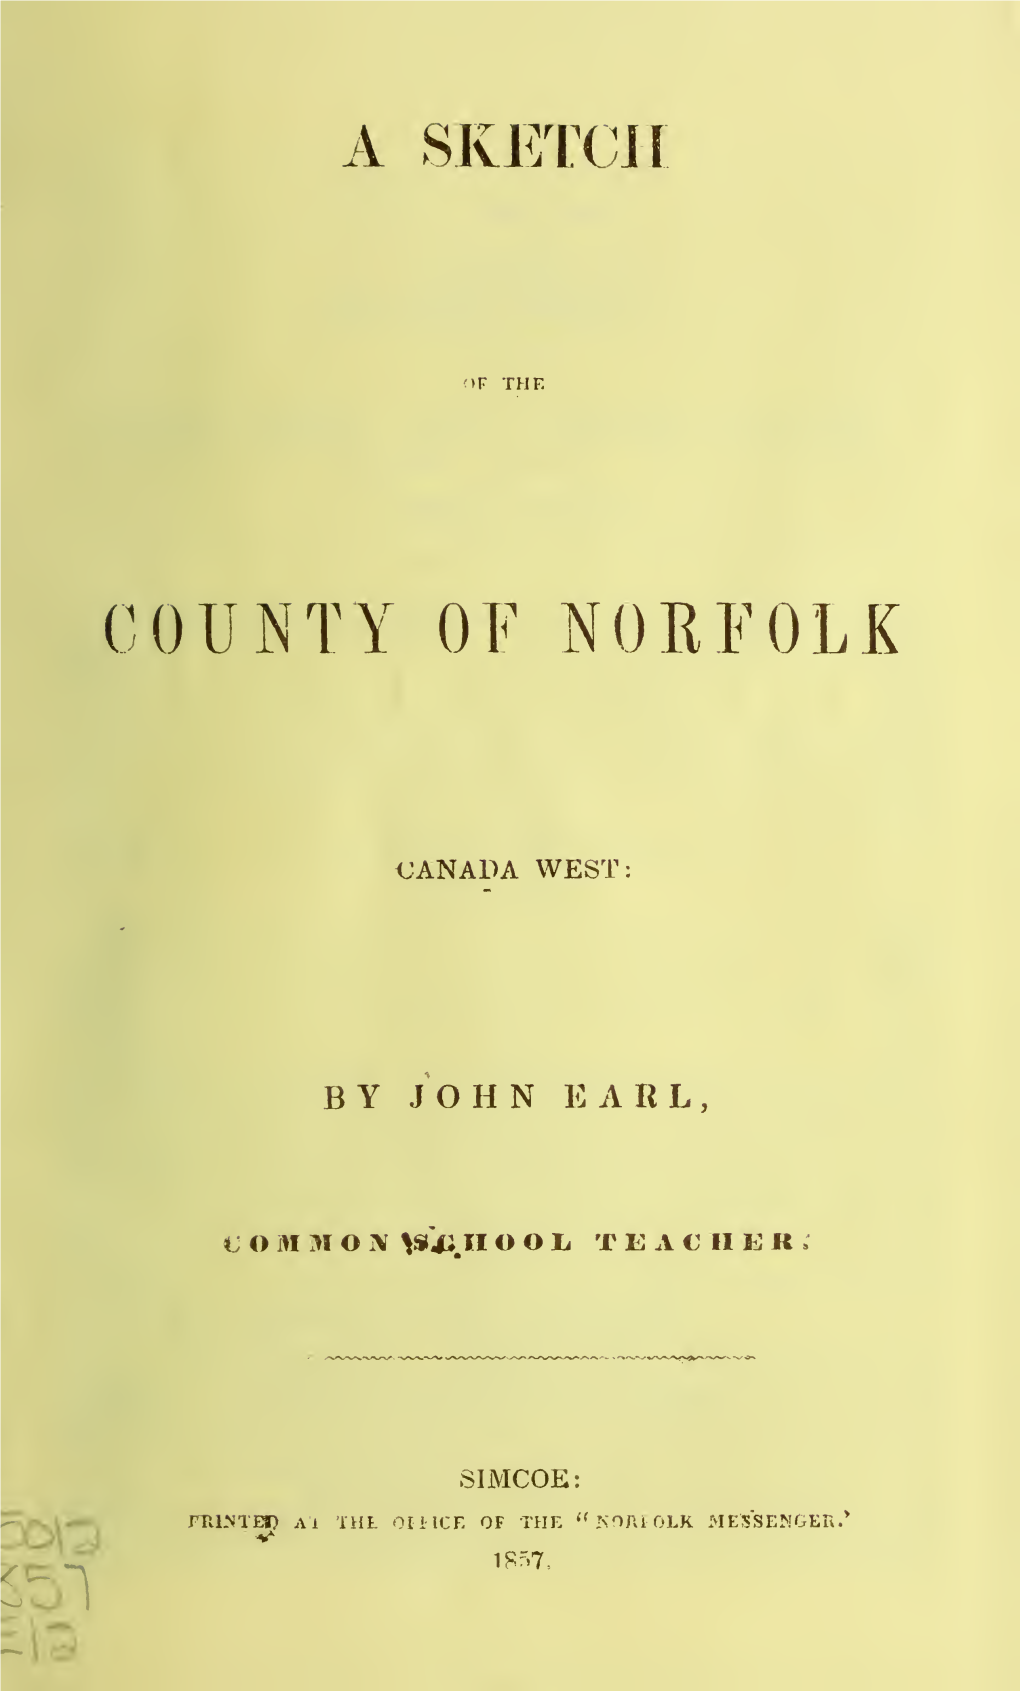 Sketch of the County of Norfolk Canada West